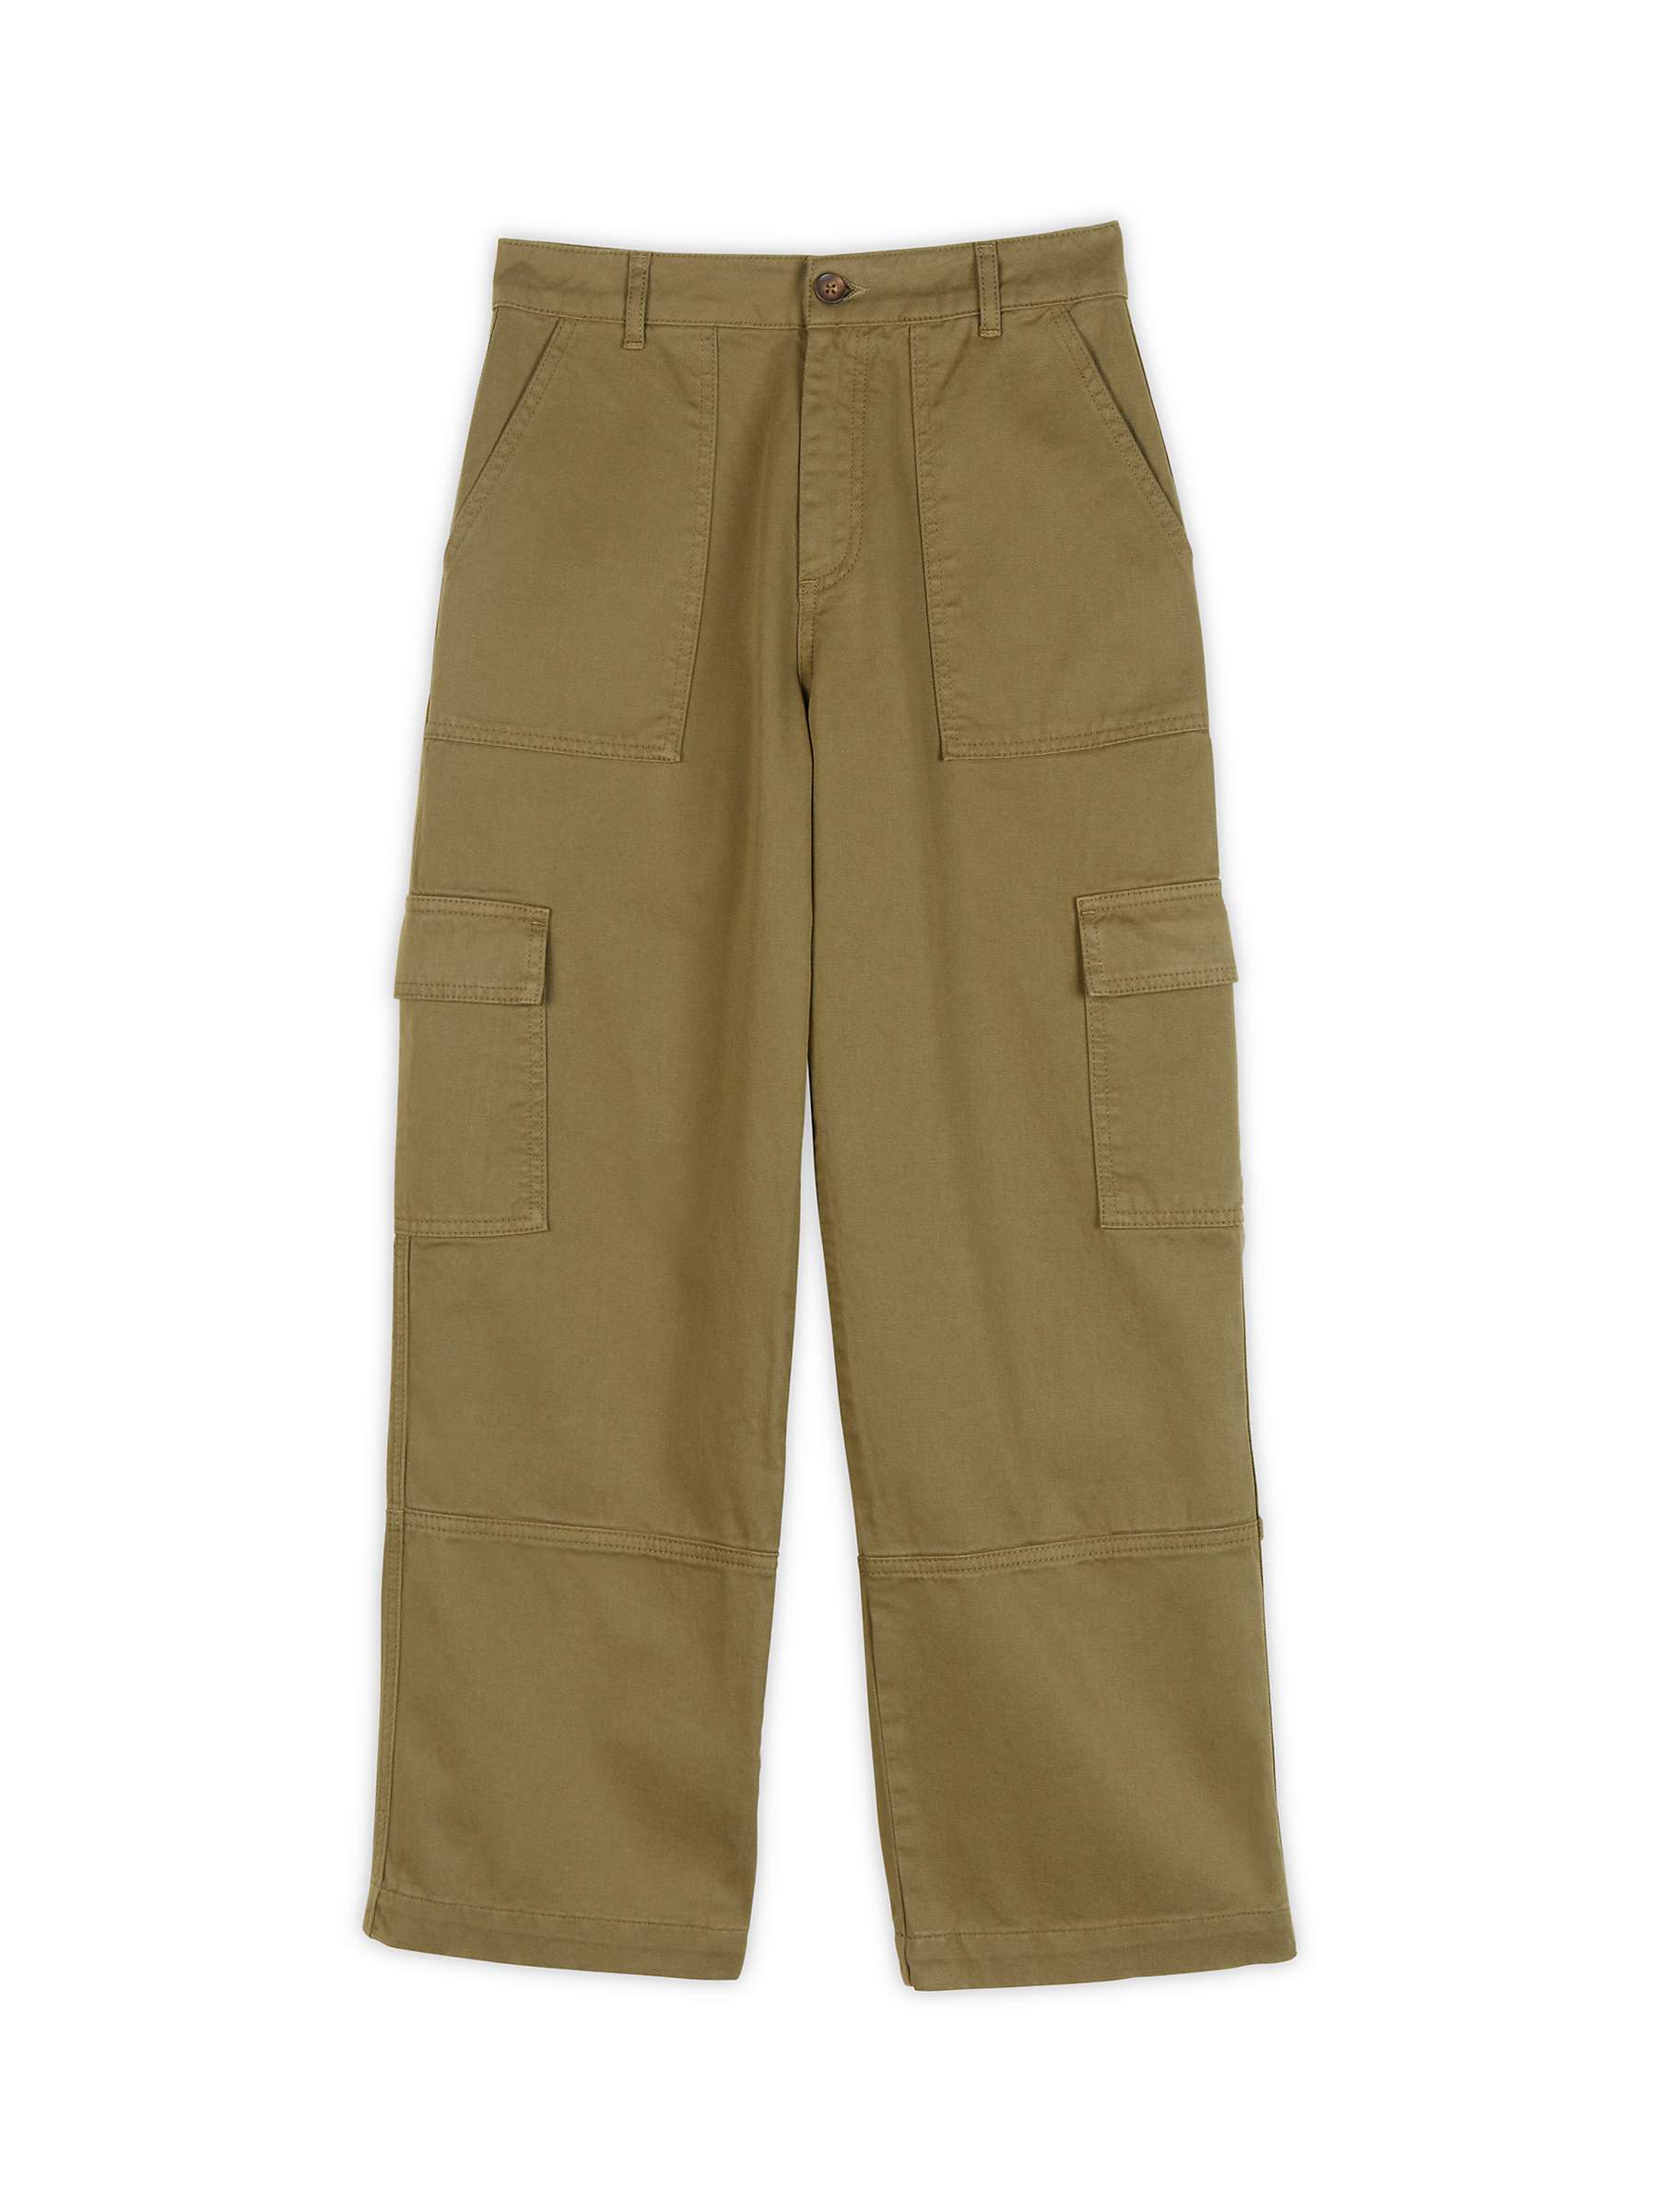 Buy Albaray Military Pocket Organic Cotton Trousers, Olive Online at johnlewis.com